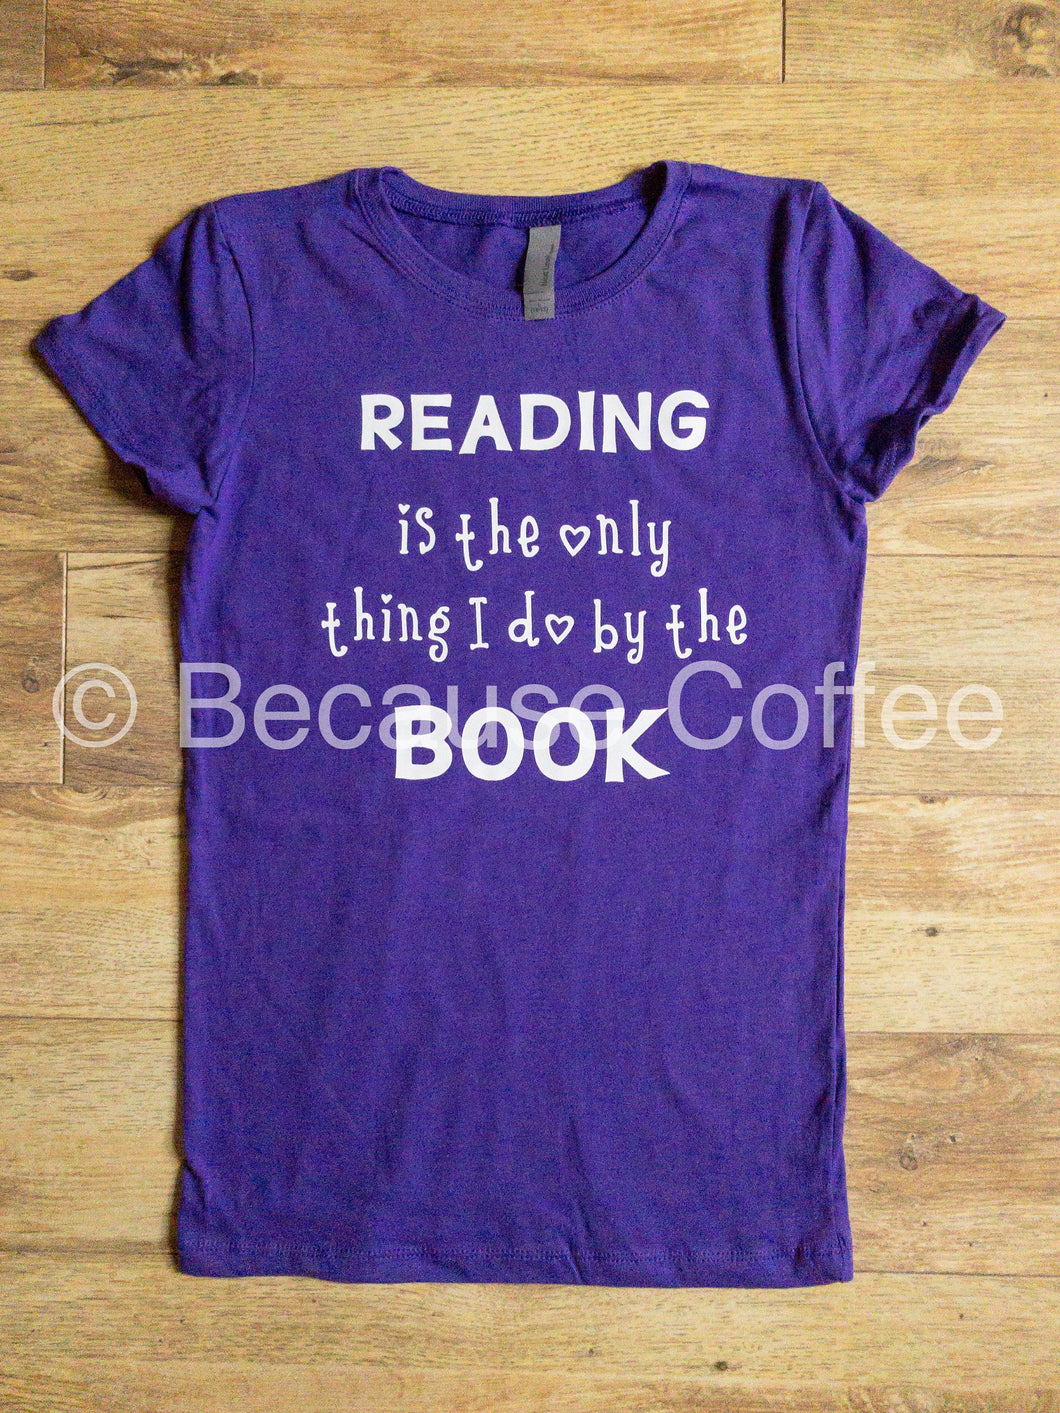 Reading is the only thing I do by the Book